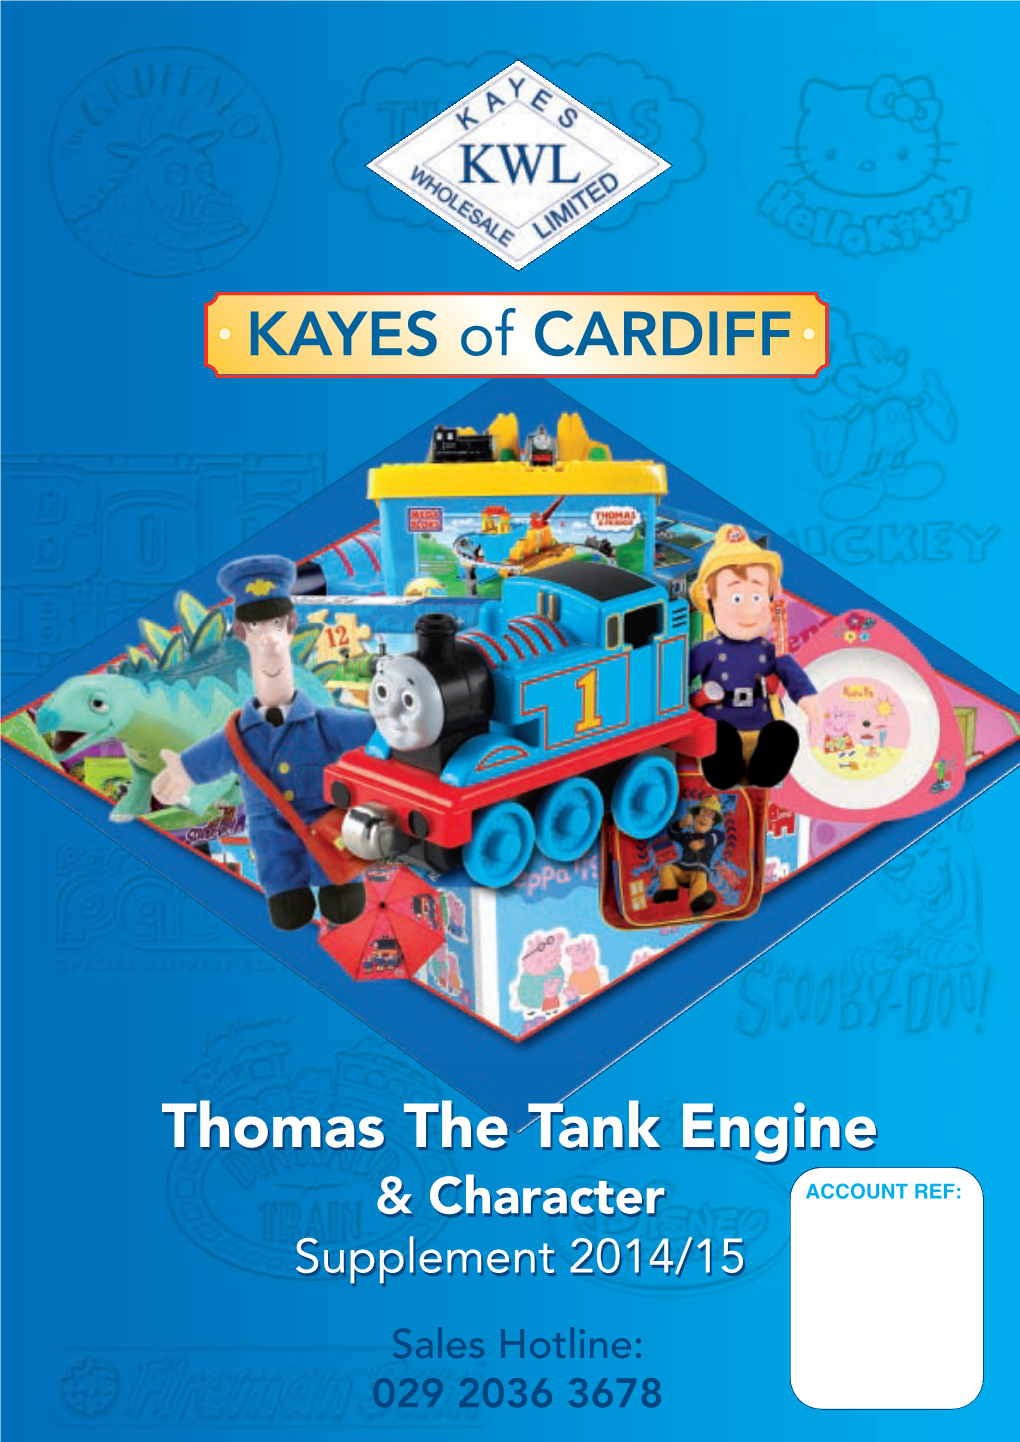 Thomas the Tank Engine and Other Leading Character Brands